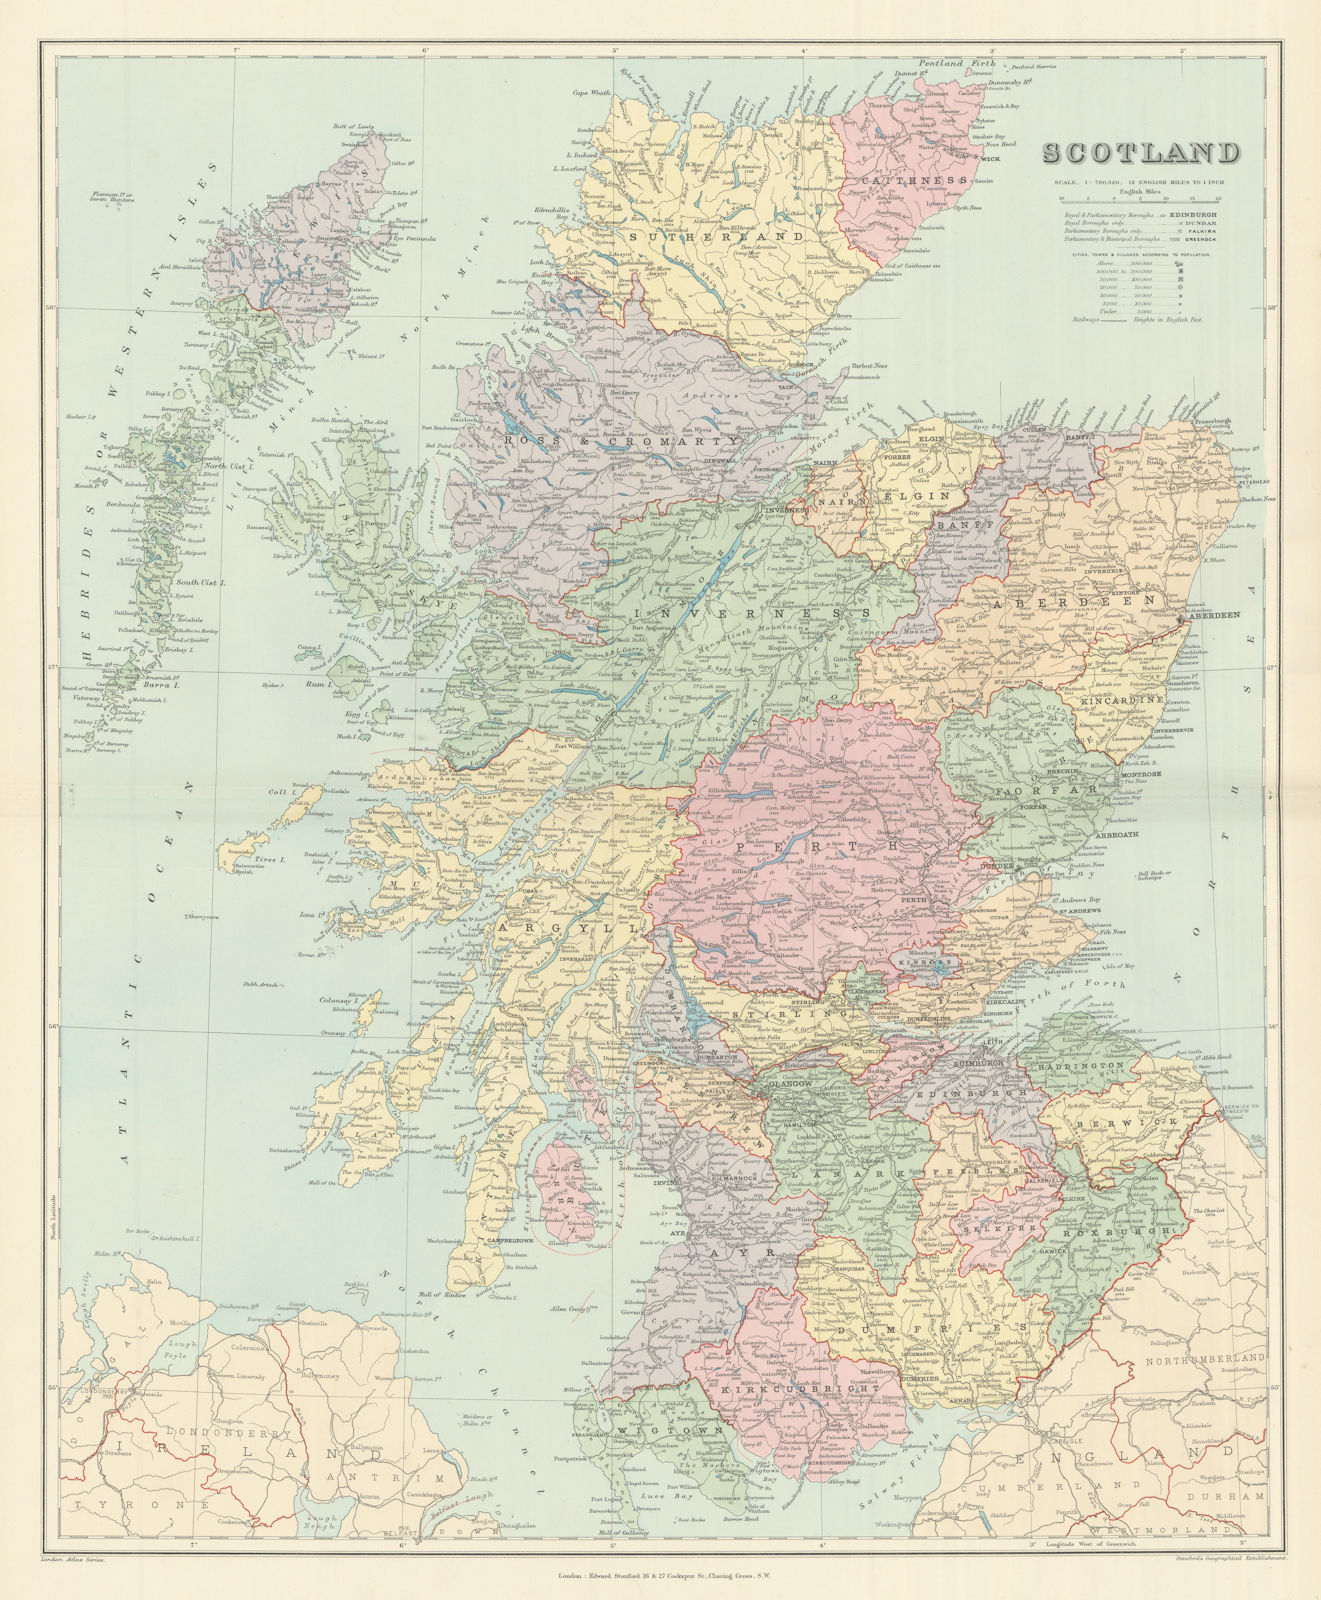 Scotland. Counties & railways. Large 66x54cm. STANFORD 1894 old antique map